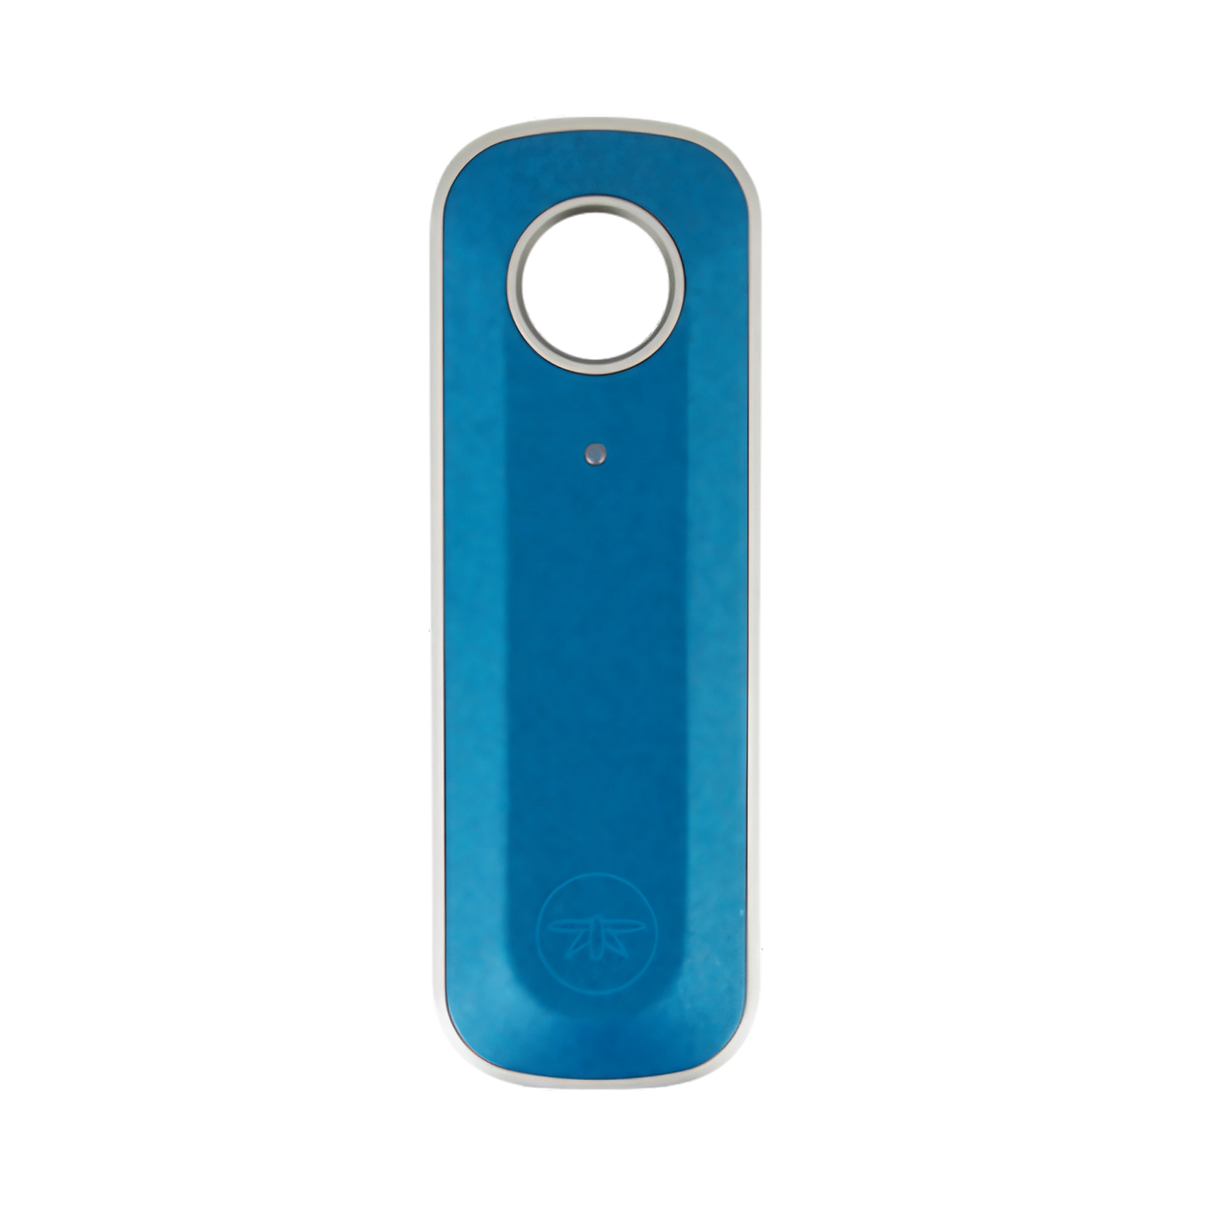 Firefly 2 Top Lid in blue quartz, front view, compatible with Firefly vaporizers